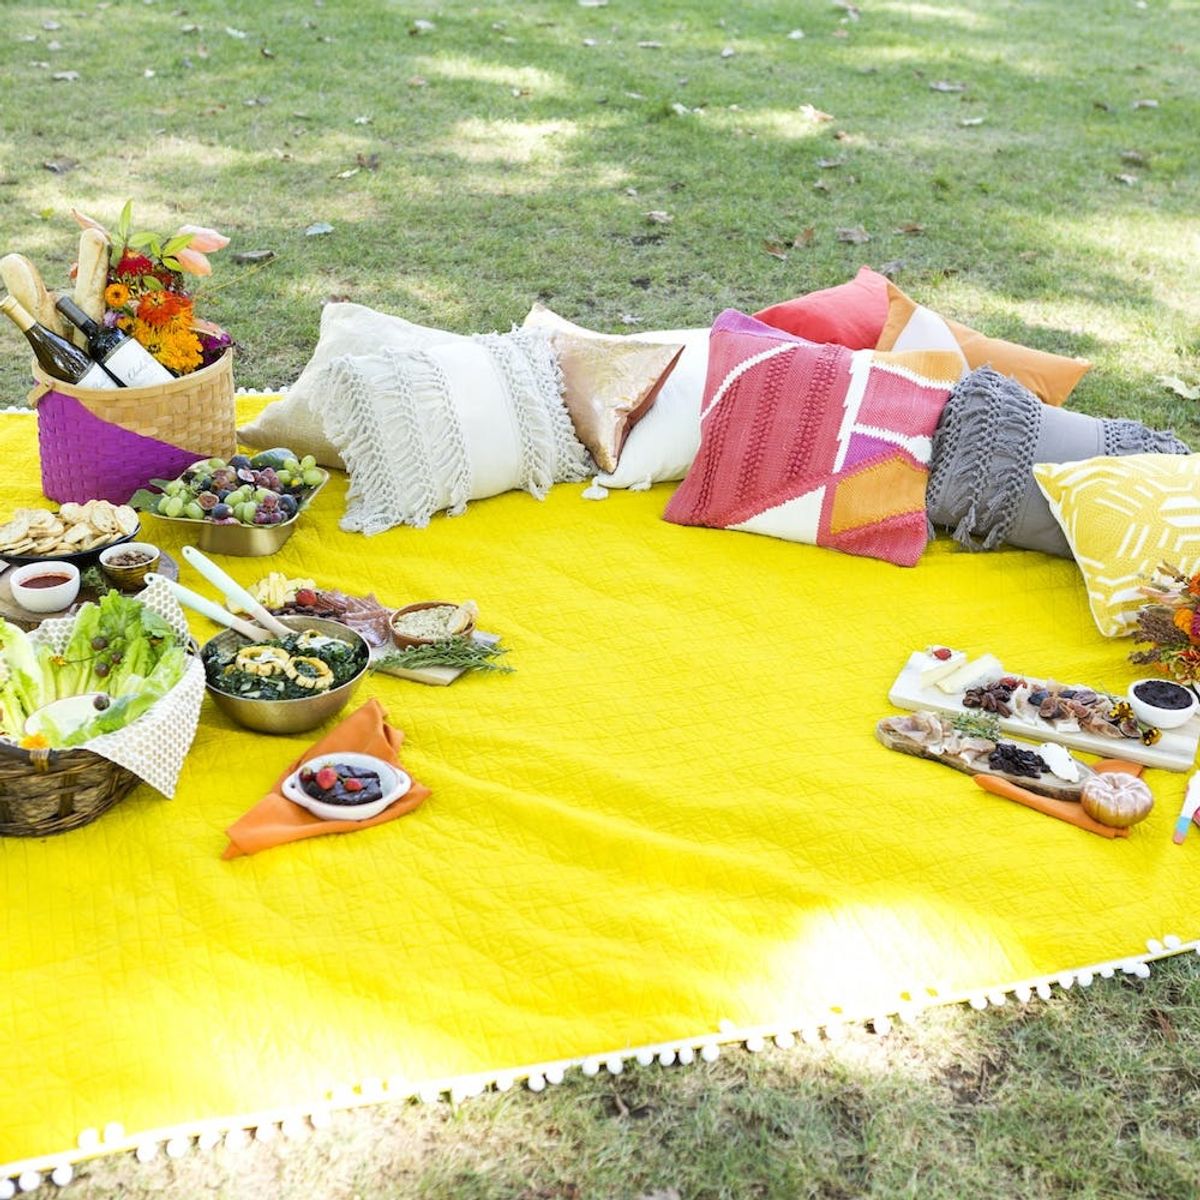 6 Stylish (and Easy!) Ideas for a Colorful Fall Picnic